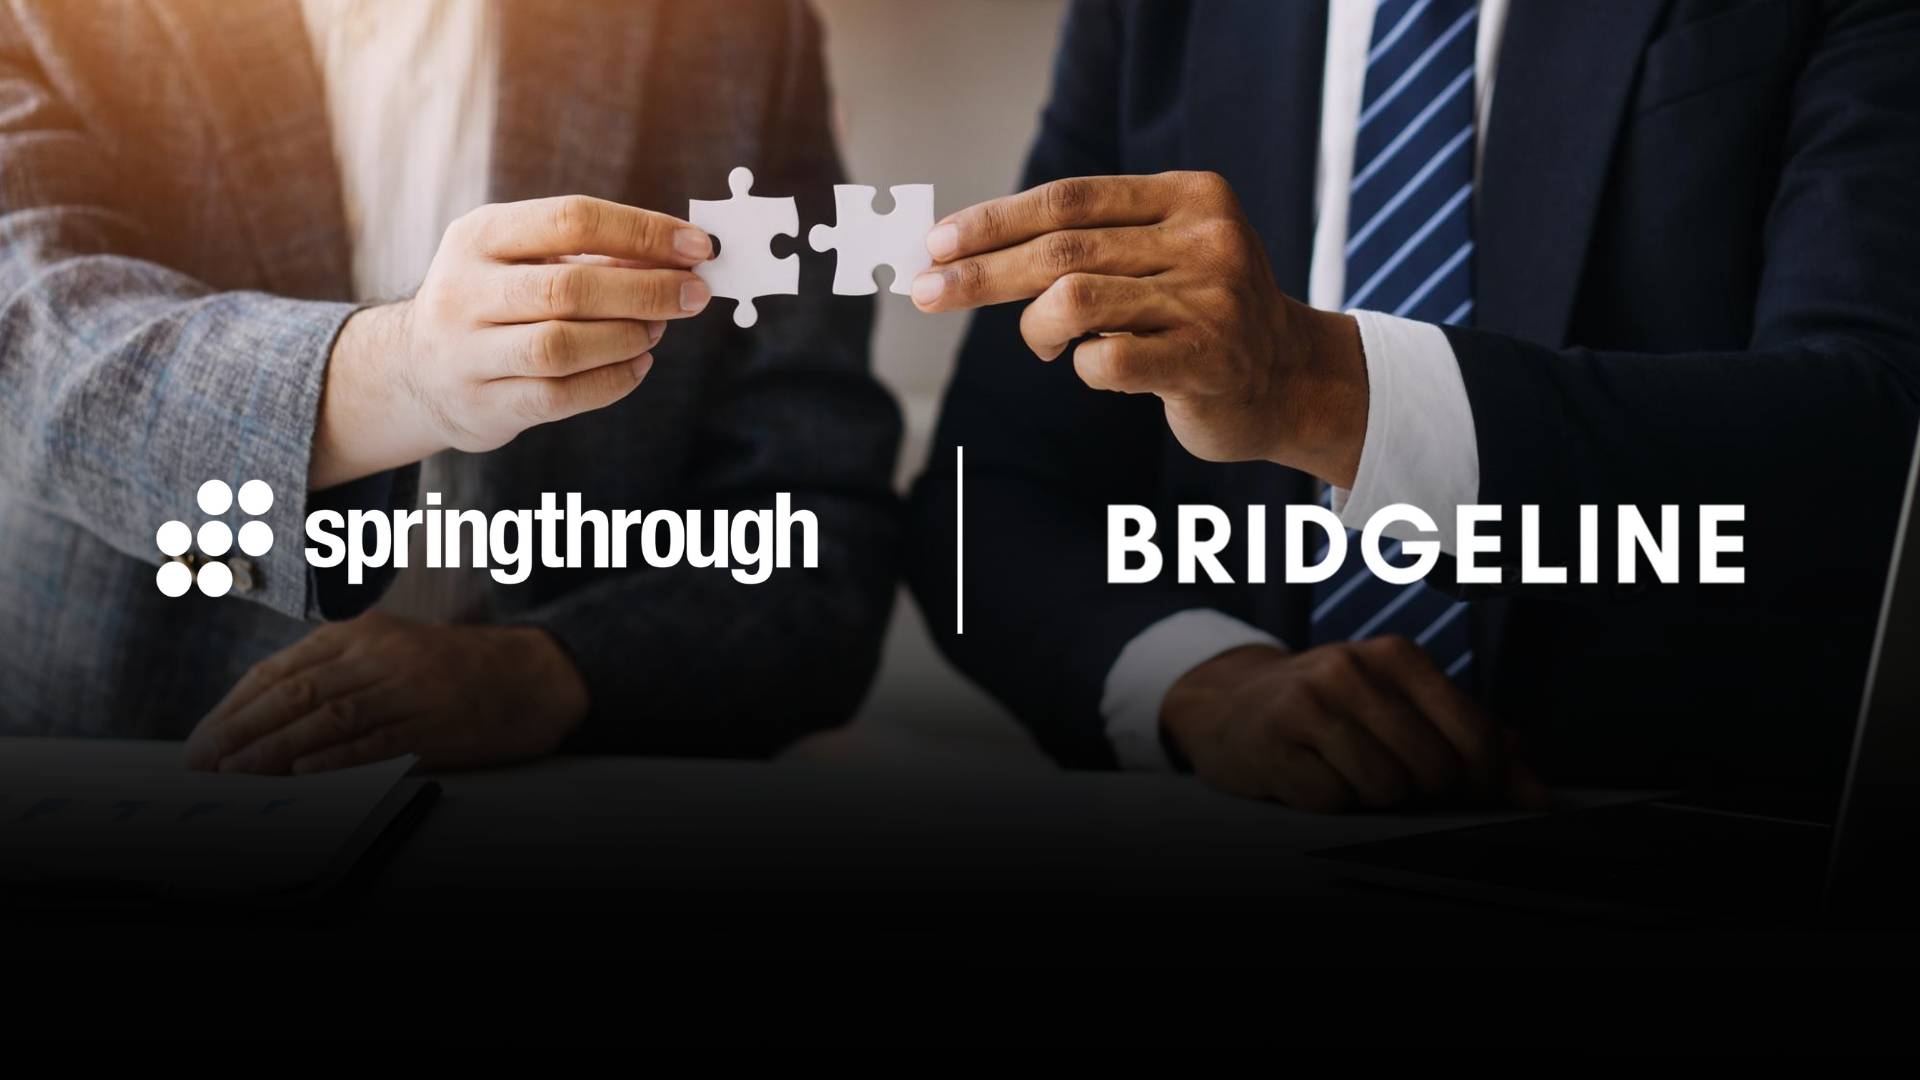 Bridgeline Digital Partners with Springthrough Agency to Boost eCommerce Revenue with HawkSearch AI